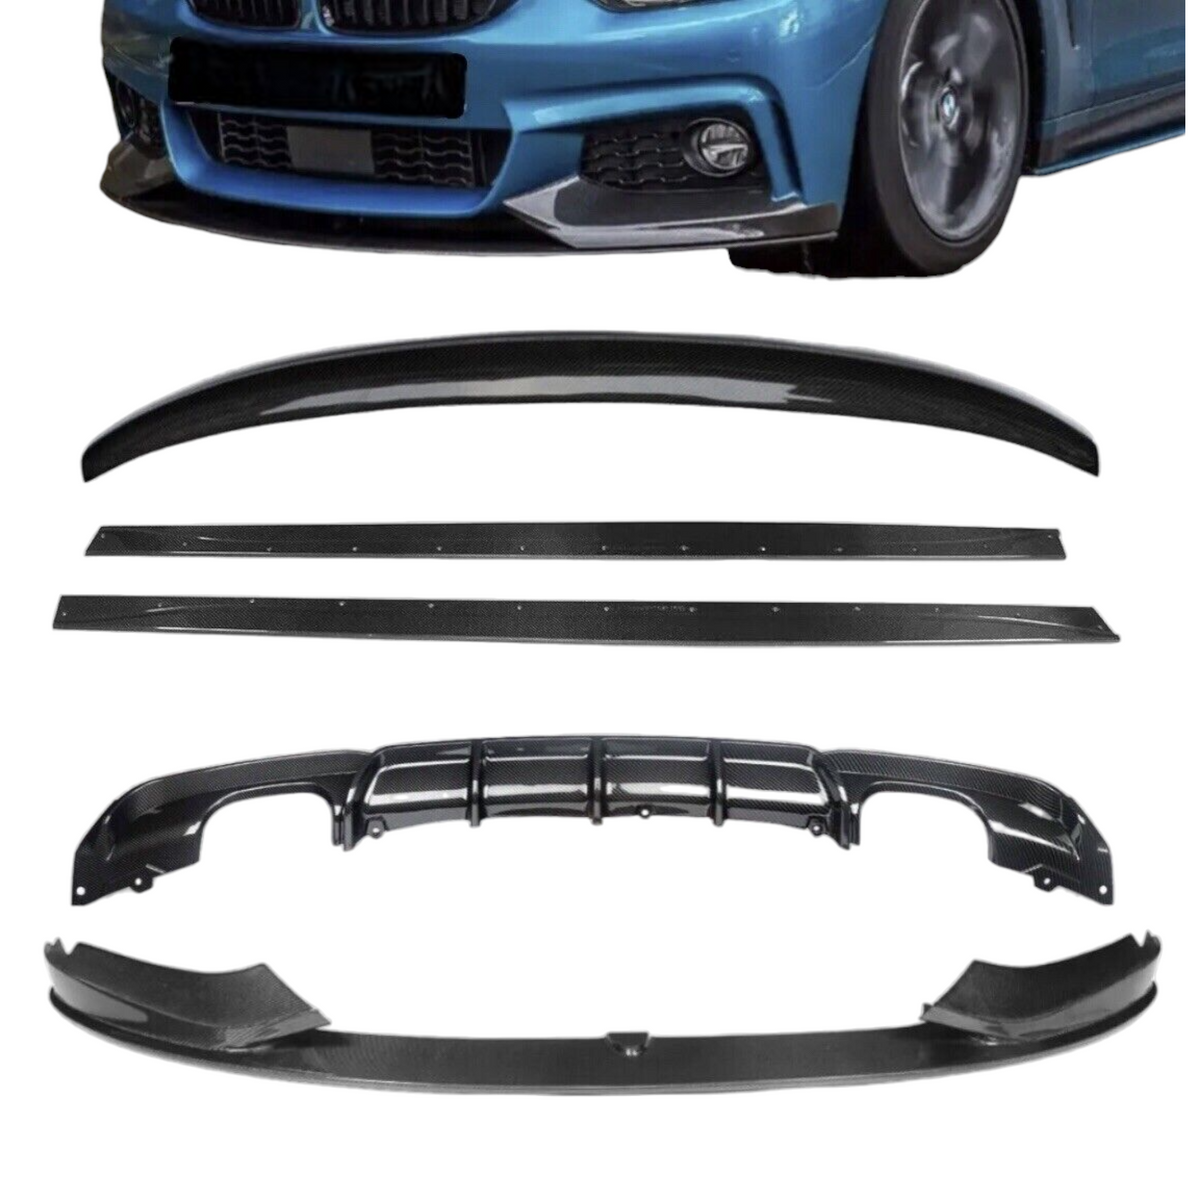 BMW F36 Gran coupe kit front splitter rear spoiler diffuser sides 4 Series quad